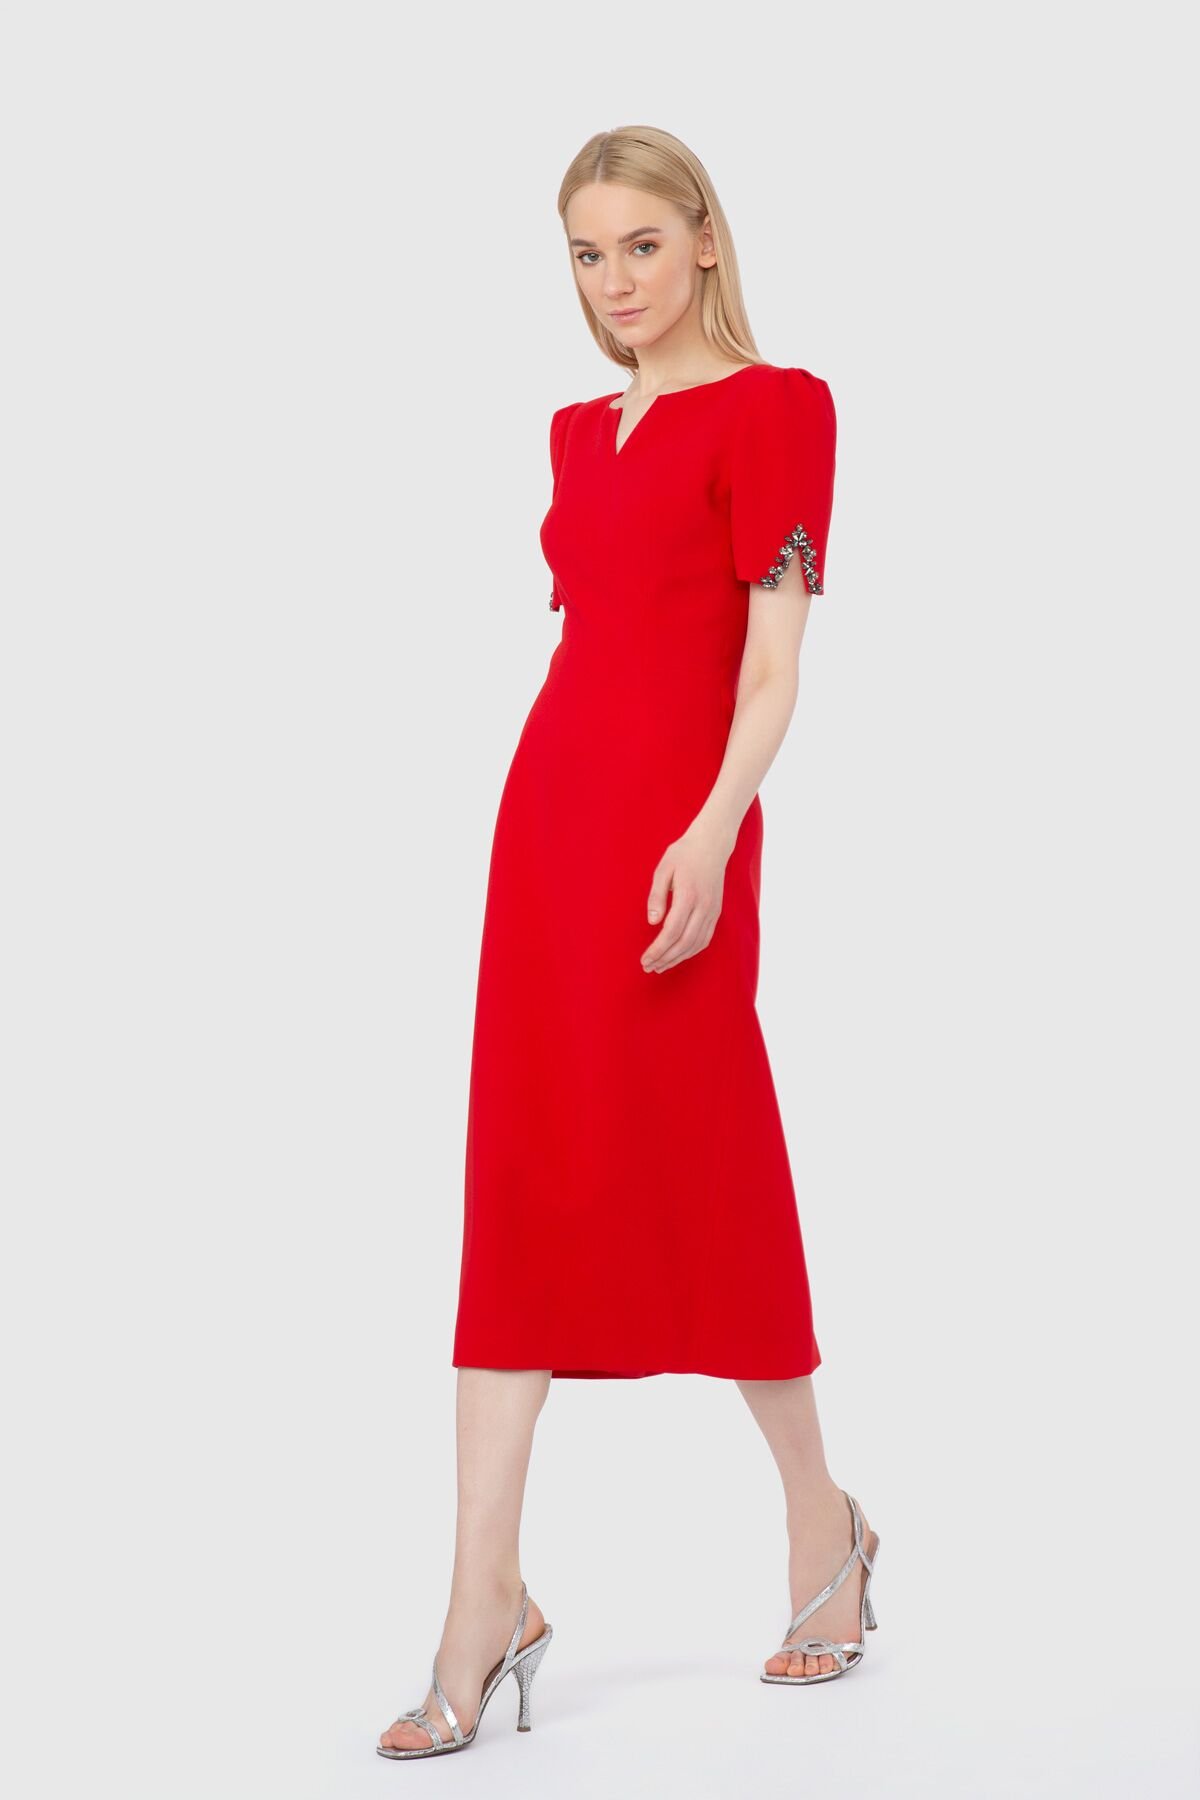 Embroidered Detailed Midi Length Tight Red Dress